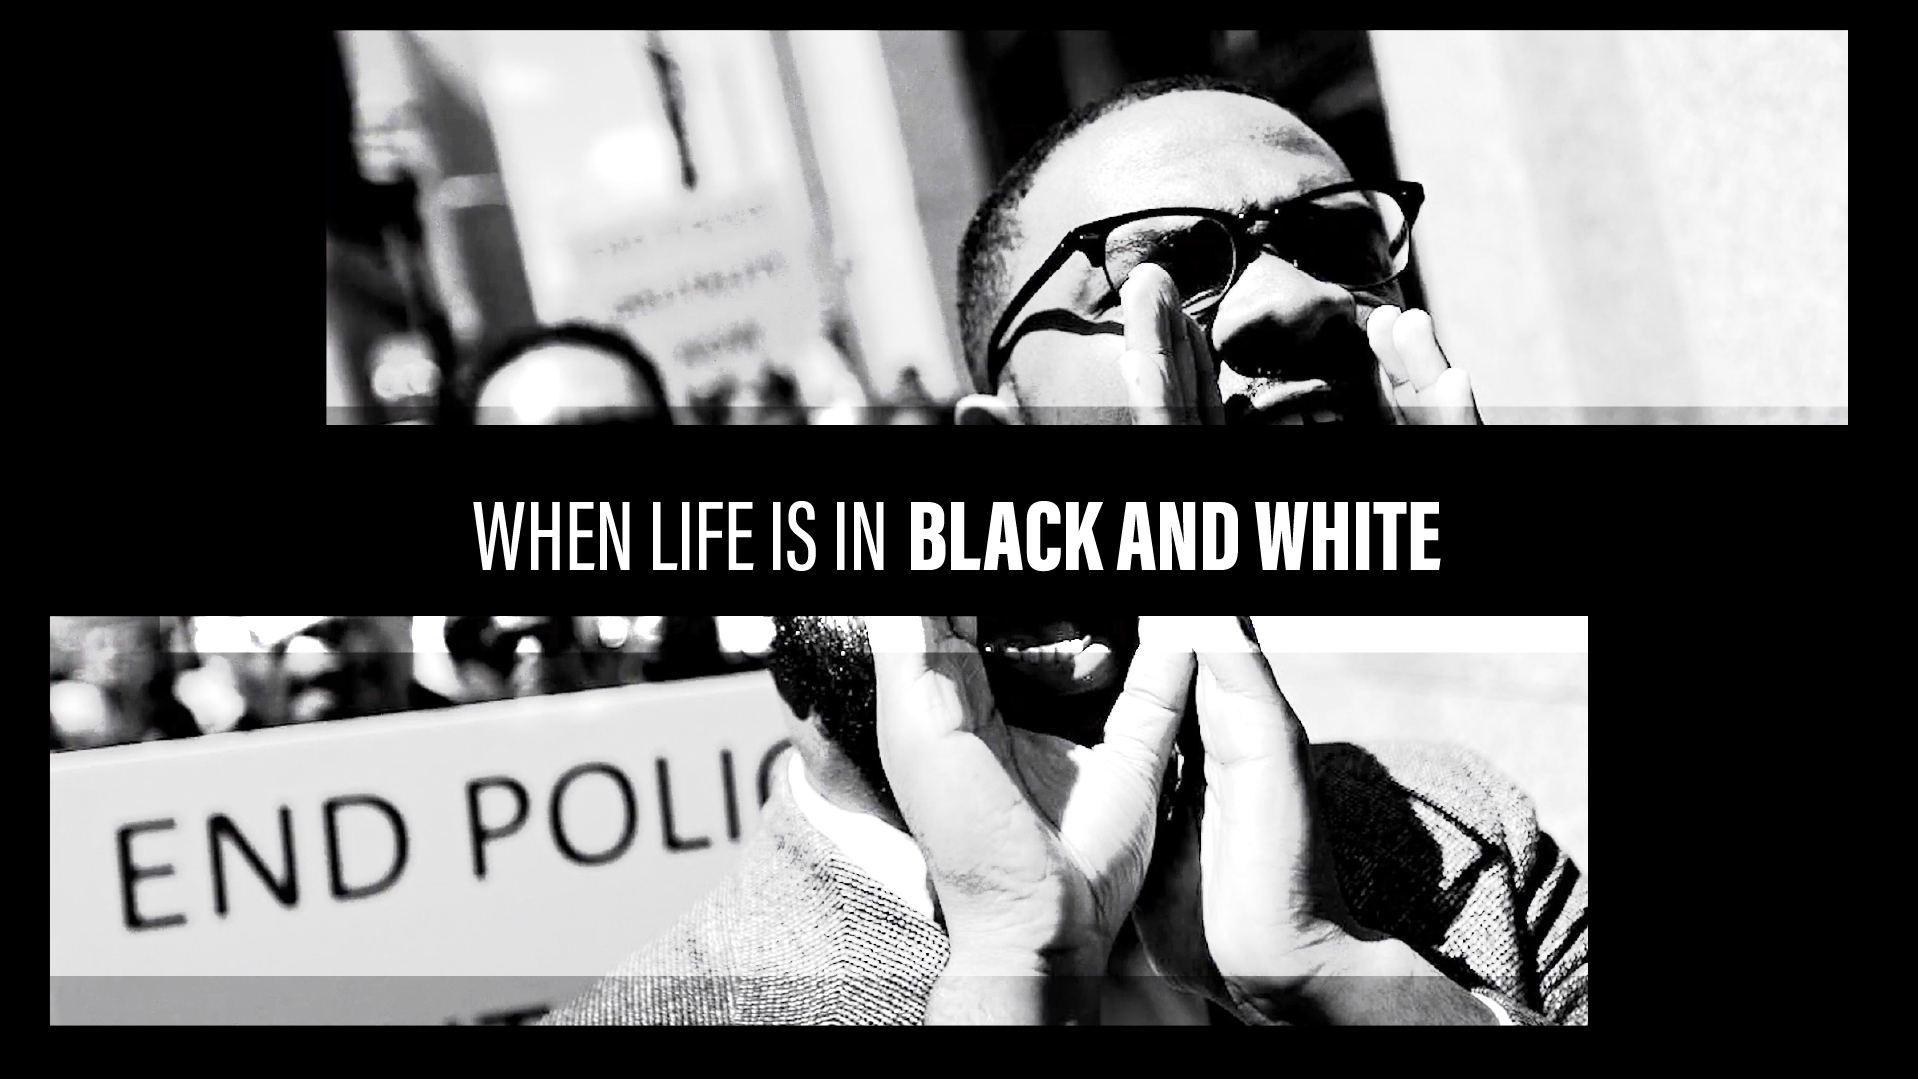 black and white image with text "when life is in black and white"